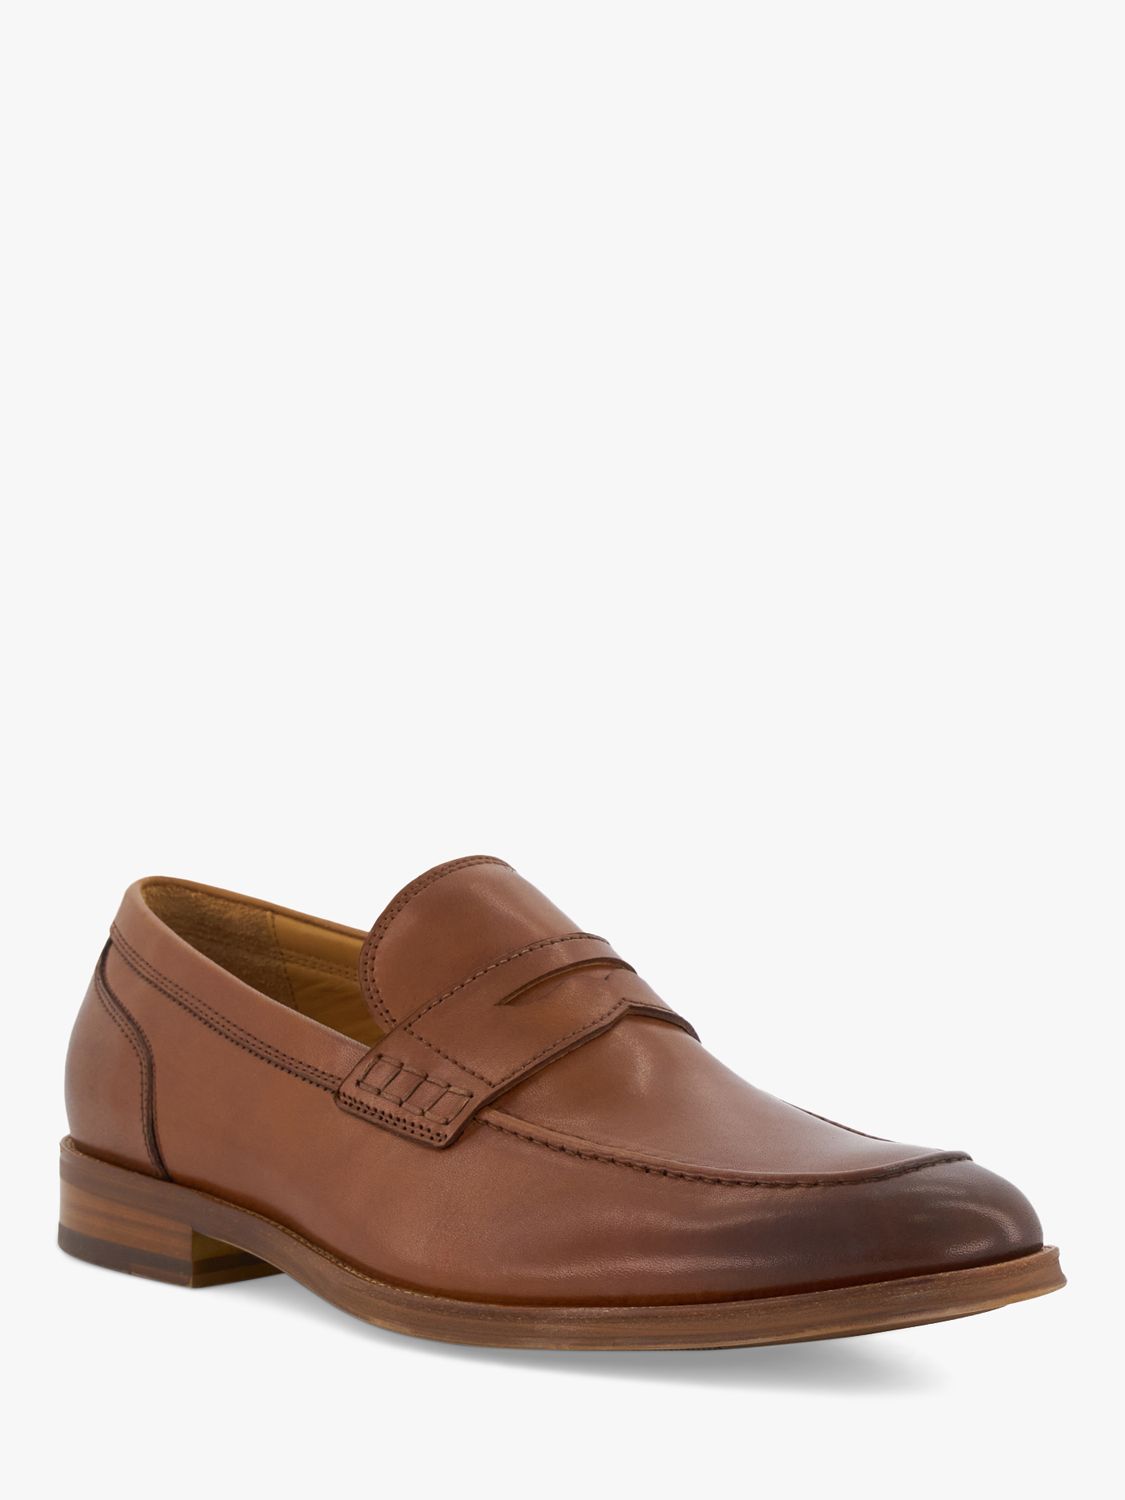 Buy Dune Wide Fit Sulli Leather Penny Loafers, Tan Online at johnlewis.com